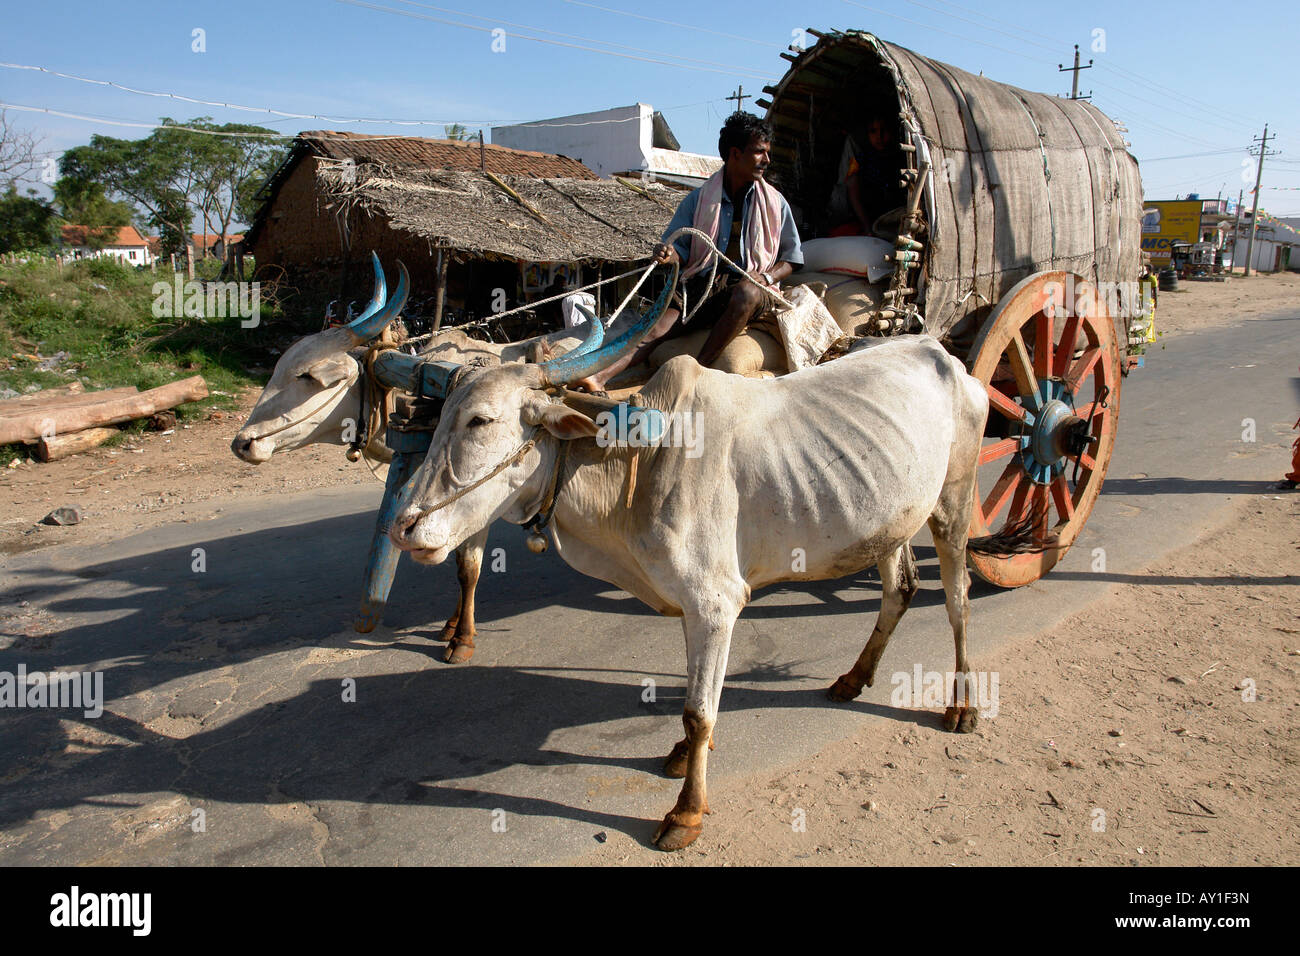 traditional indian bullock cart transport in a rural south indian village Stock Photo